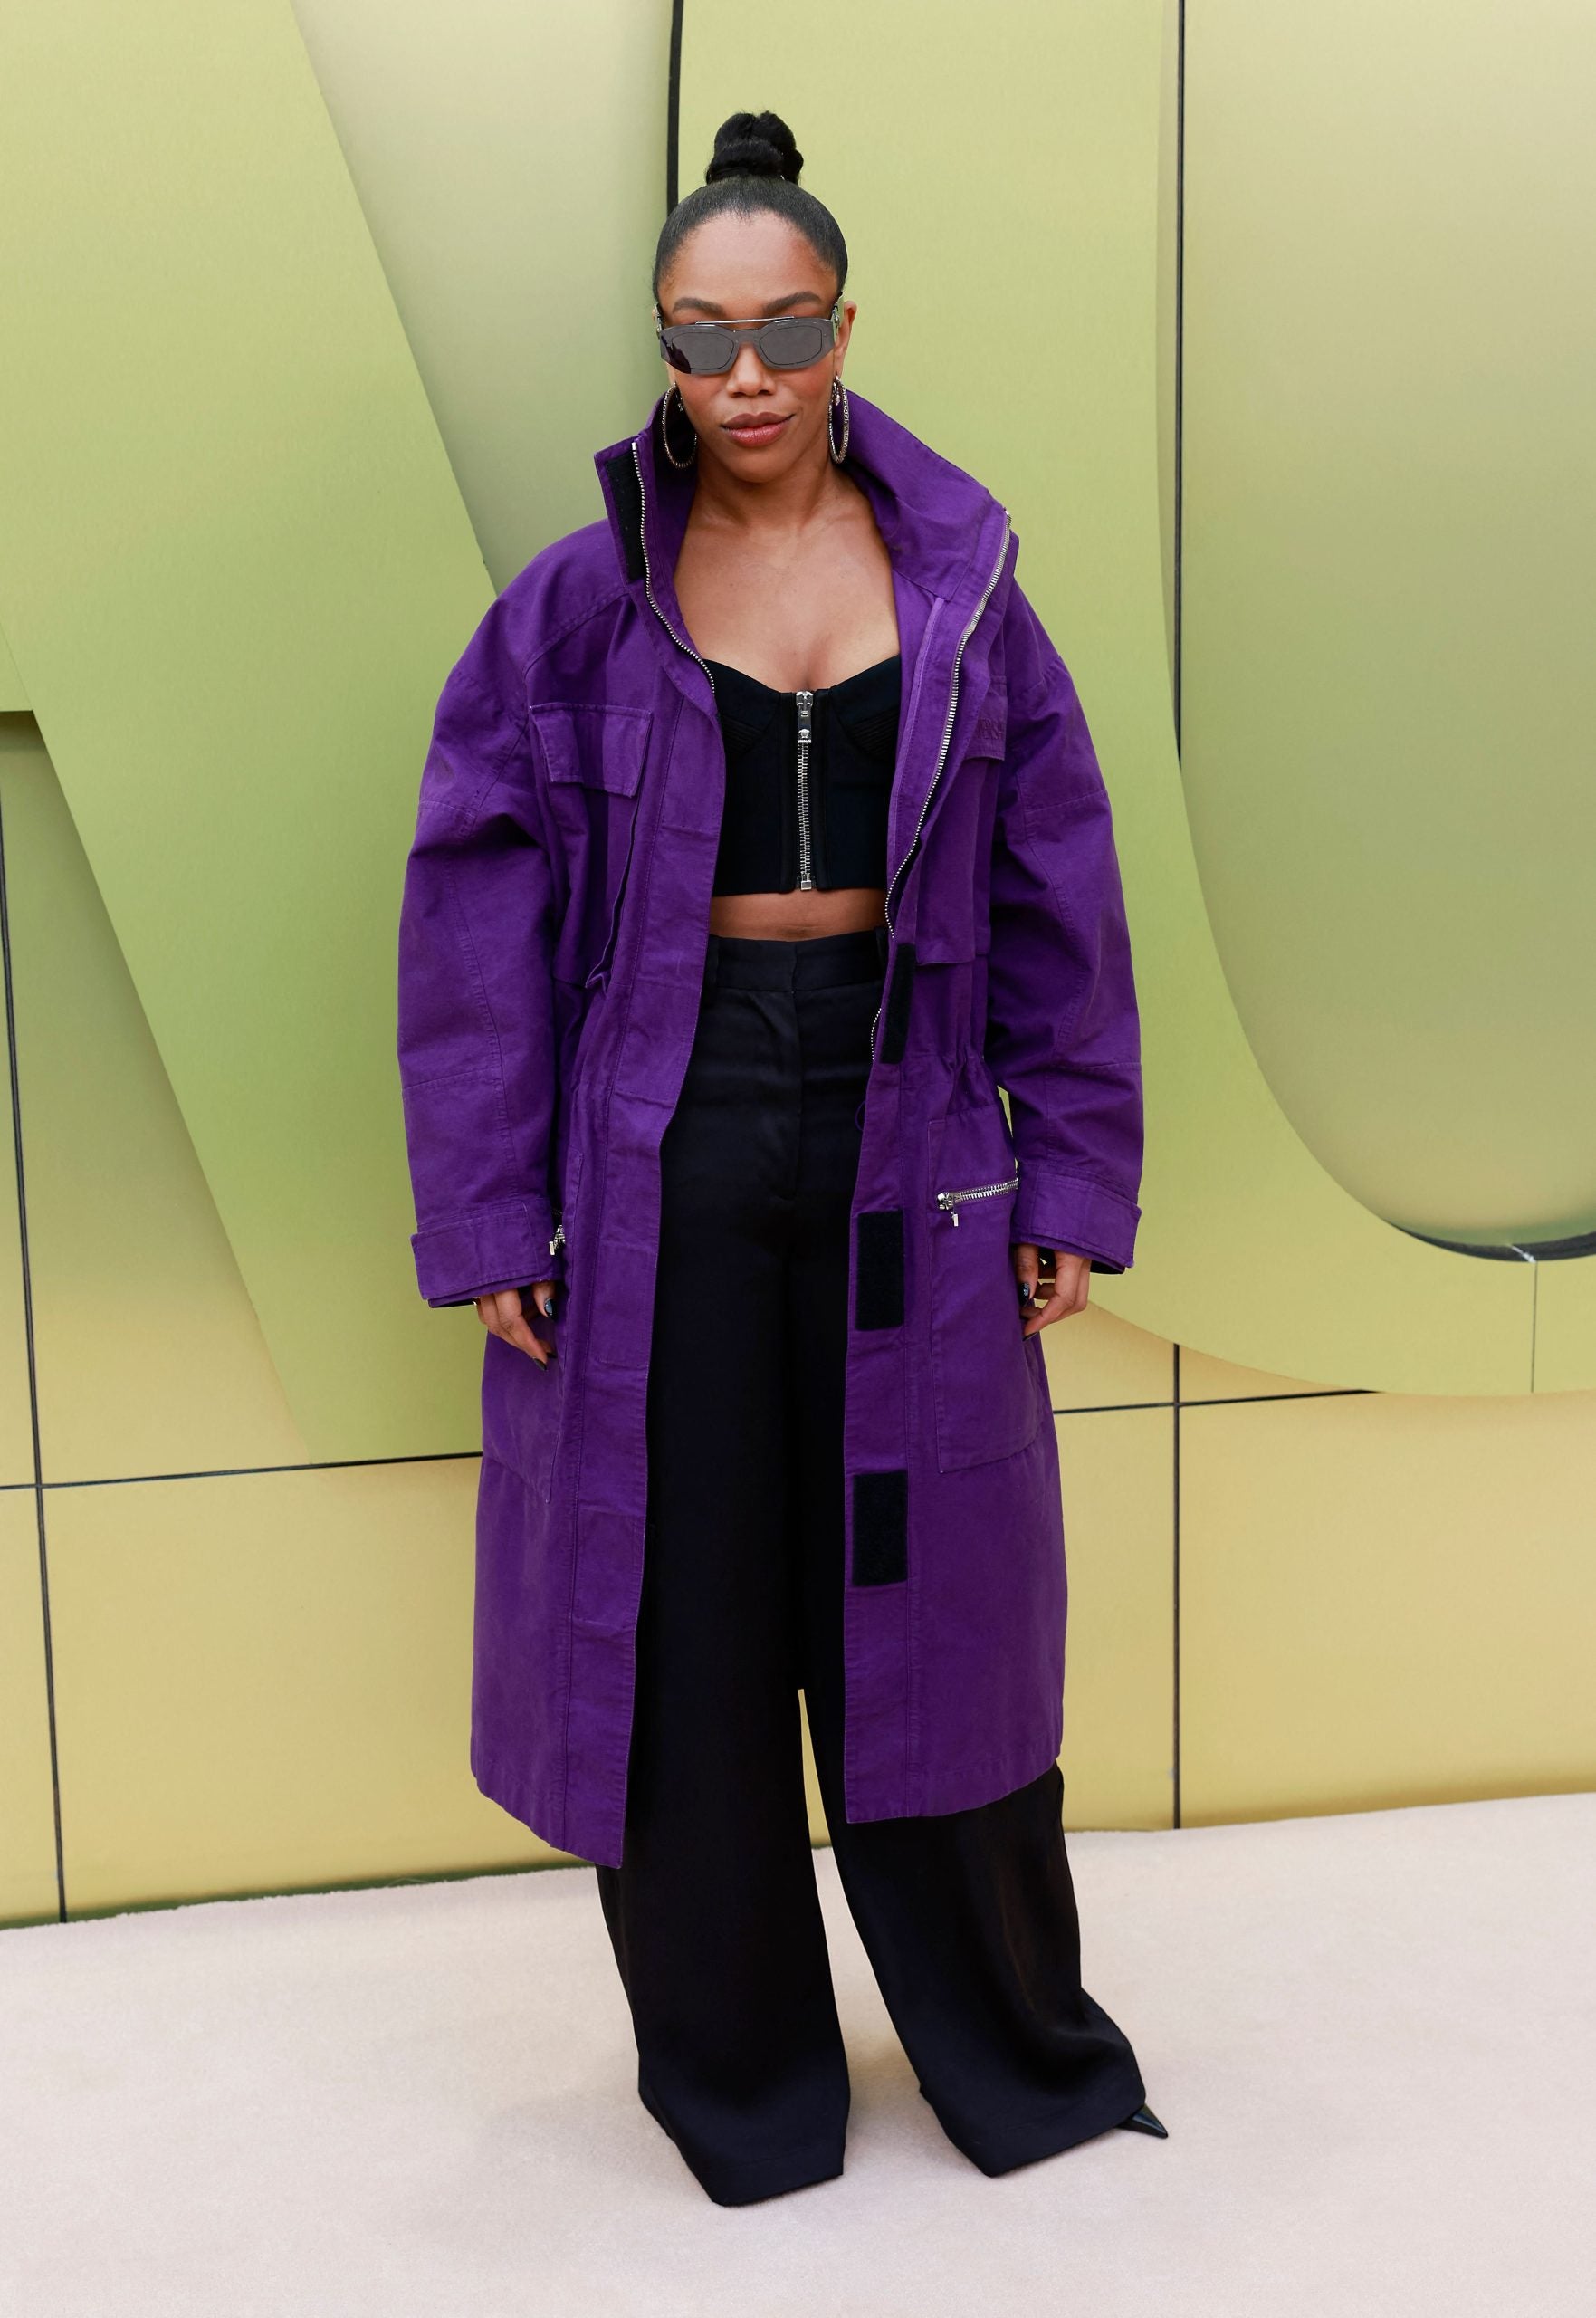 Style Star: Naomi Ackie's Red Carpet Style Evolution   